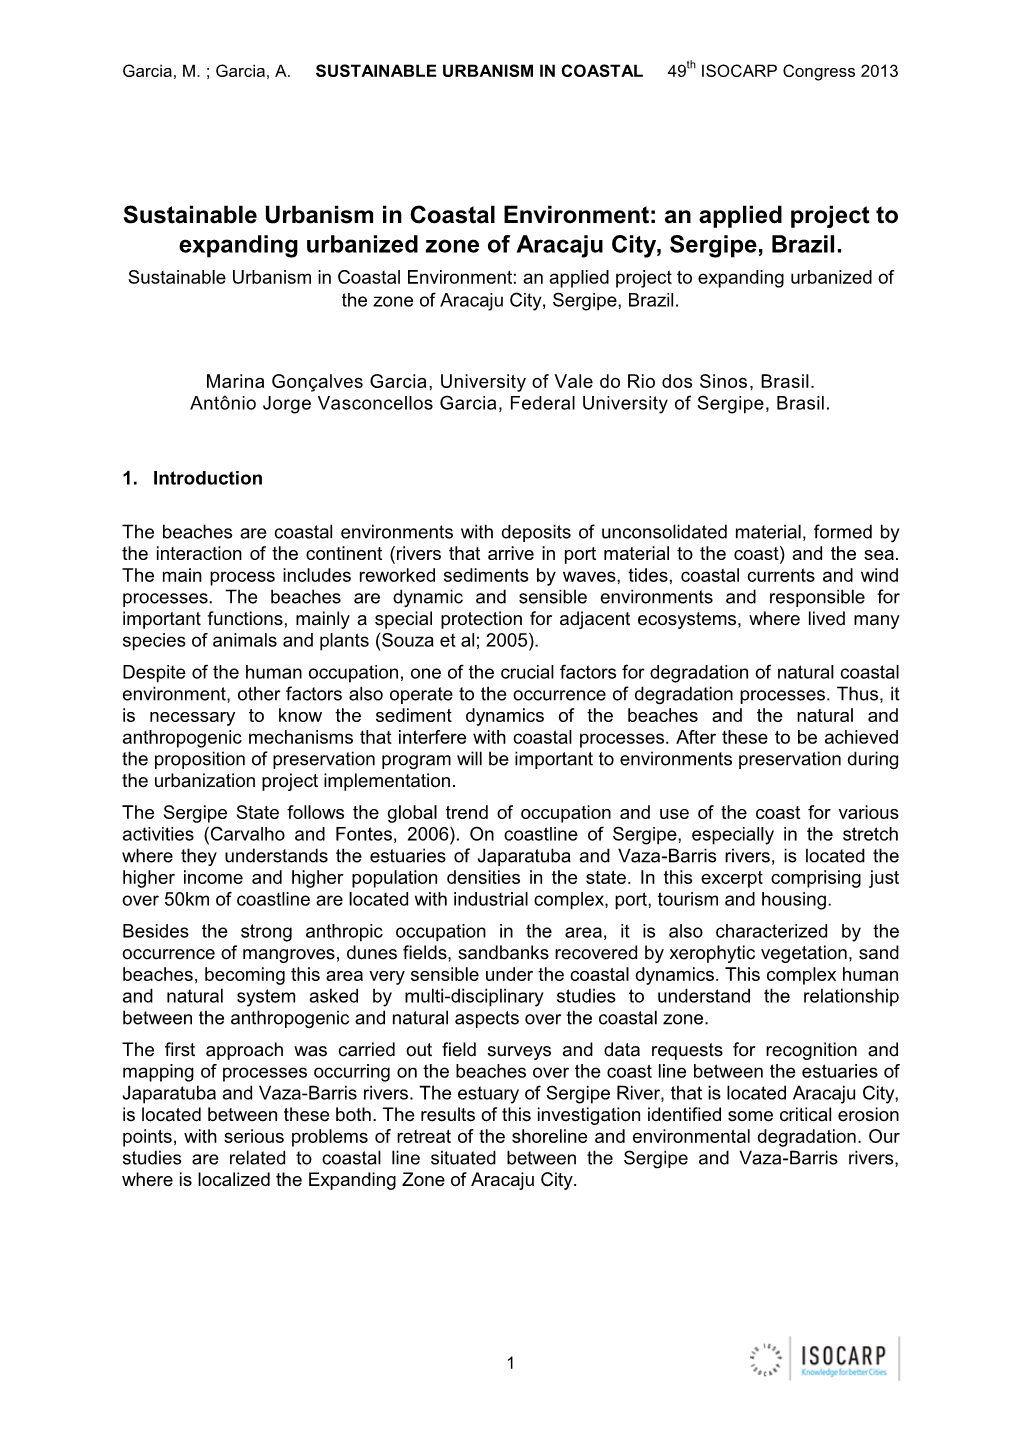 Sustainable Urbanism in Coastal Environment: an Applied Project to Expanding Urbanized Zone of Aracaju City, Sergipe, Brazil